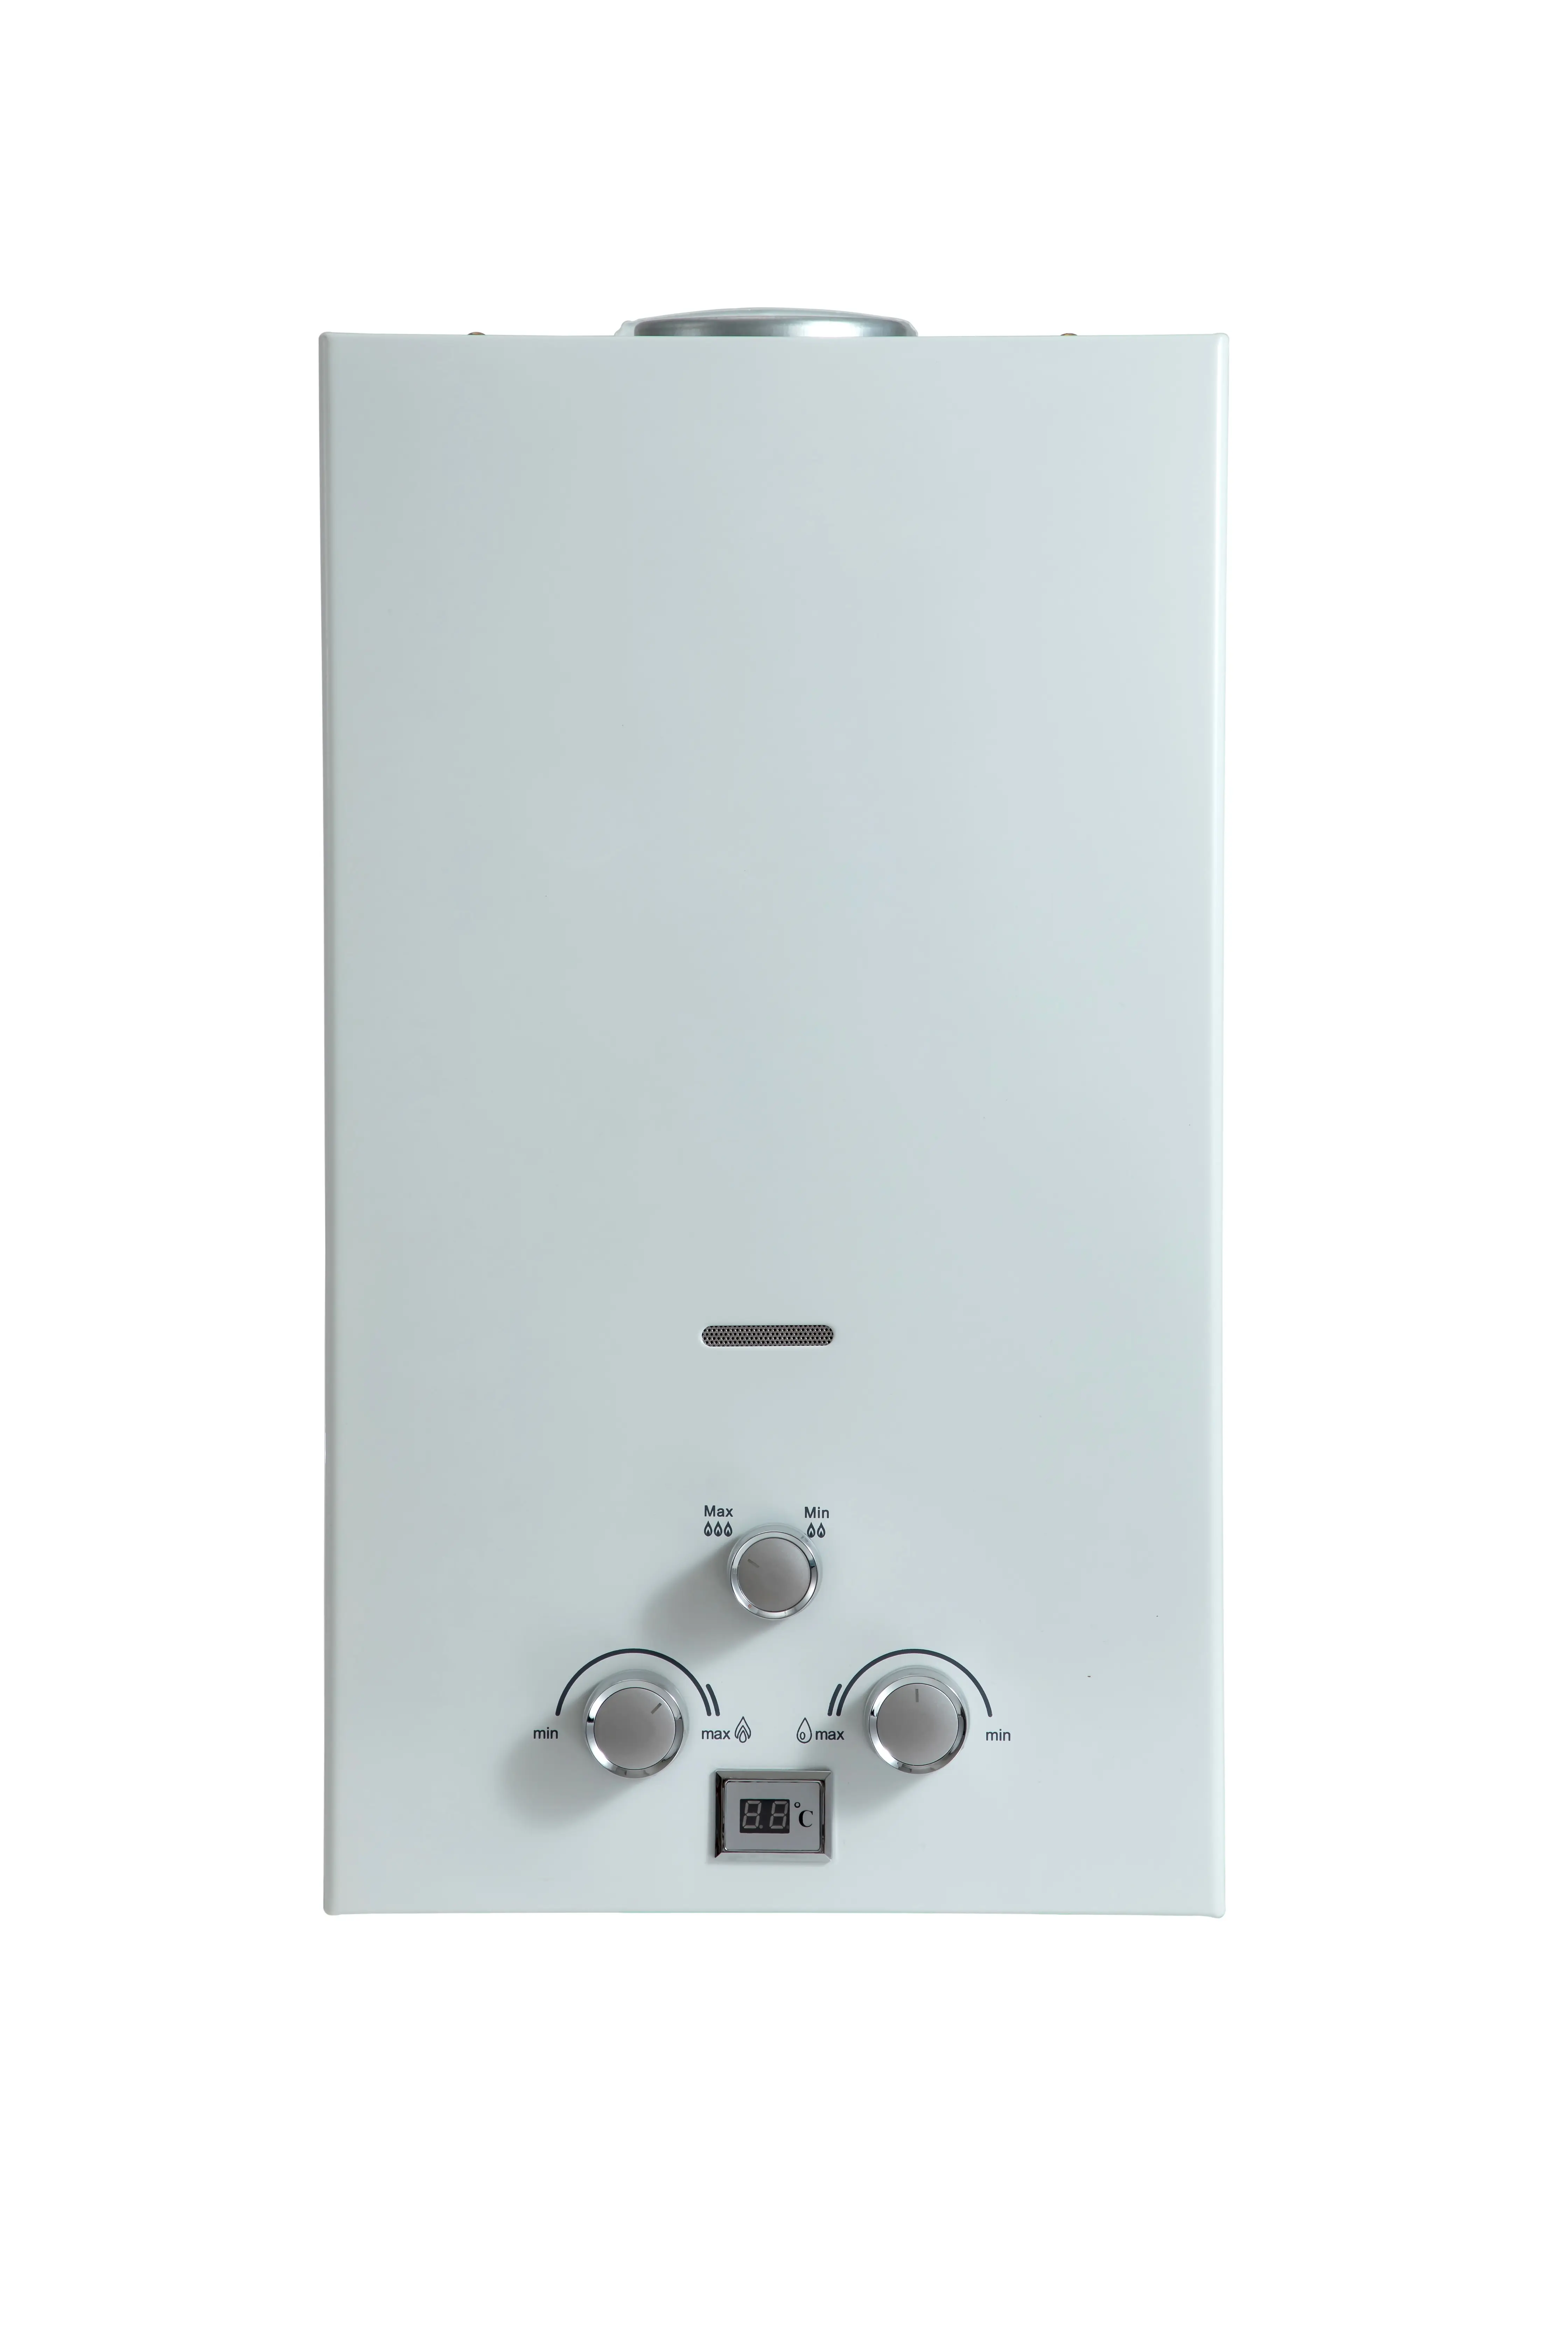 Gas Geyser Shower Geyser Liter Tankless Instant For Home White Steel Wall Stainless Lead The Industry Portable Gas Water